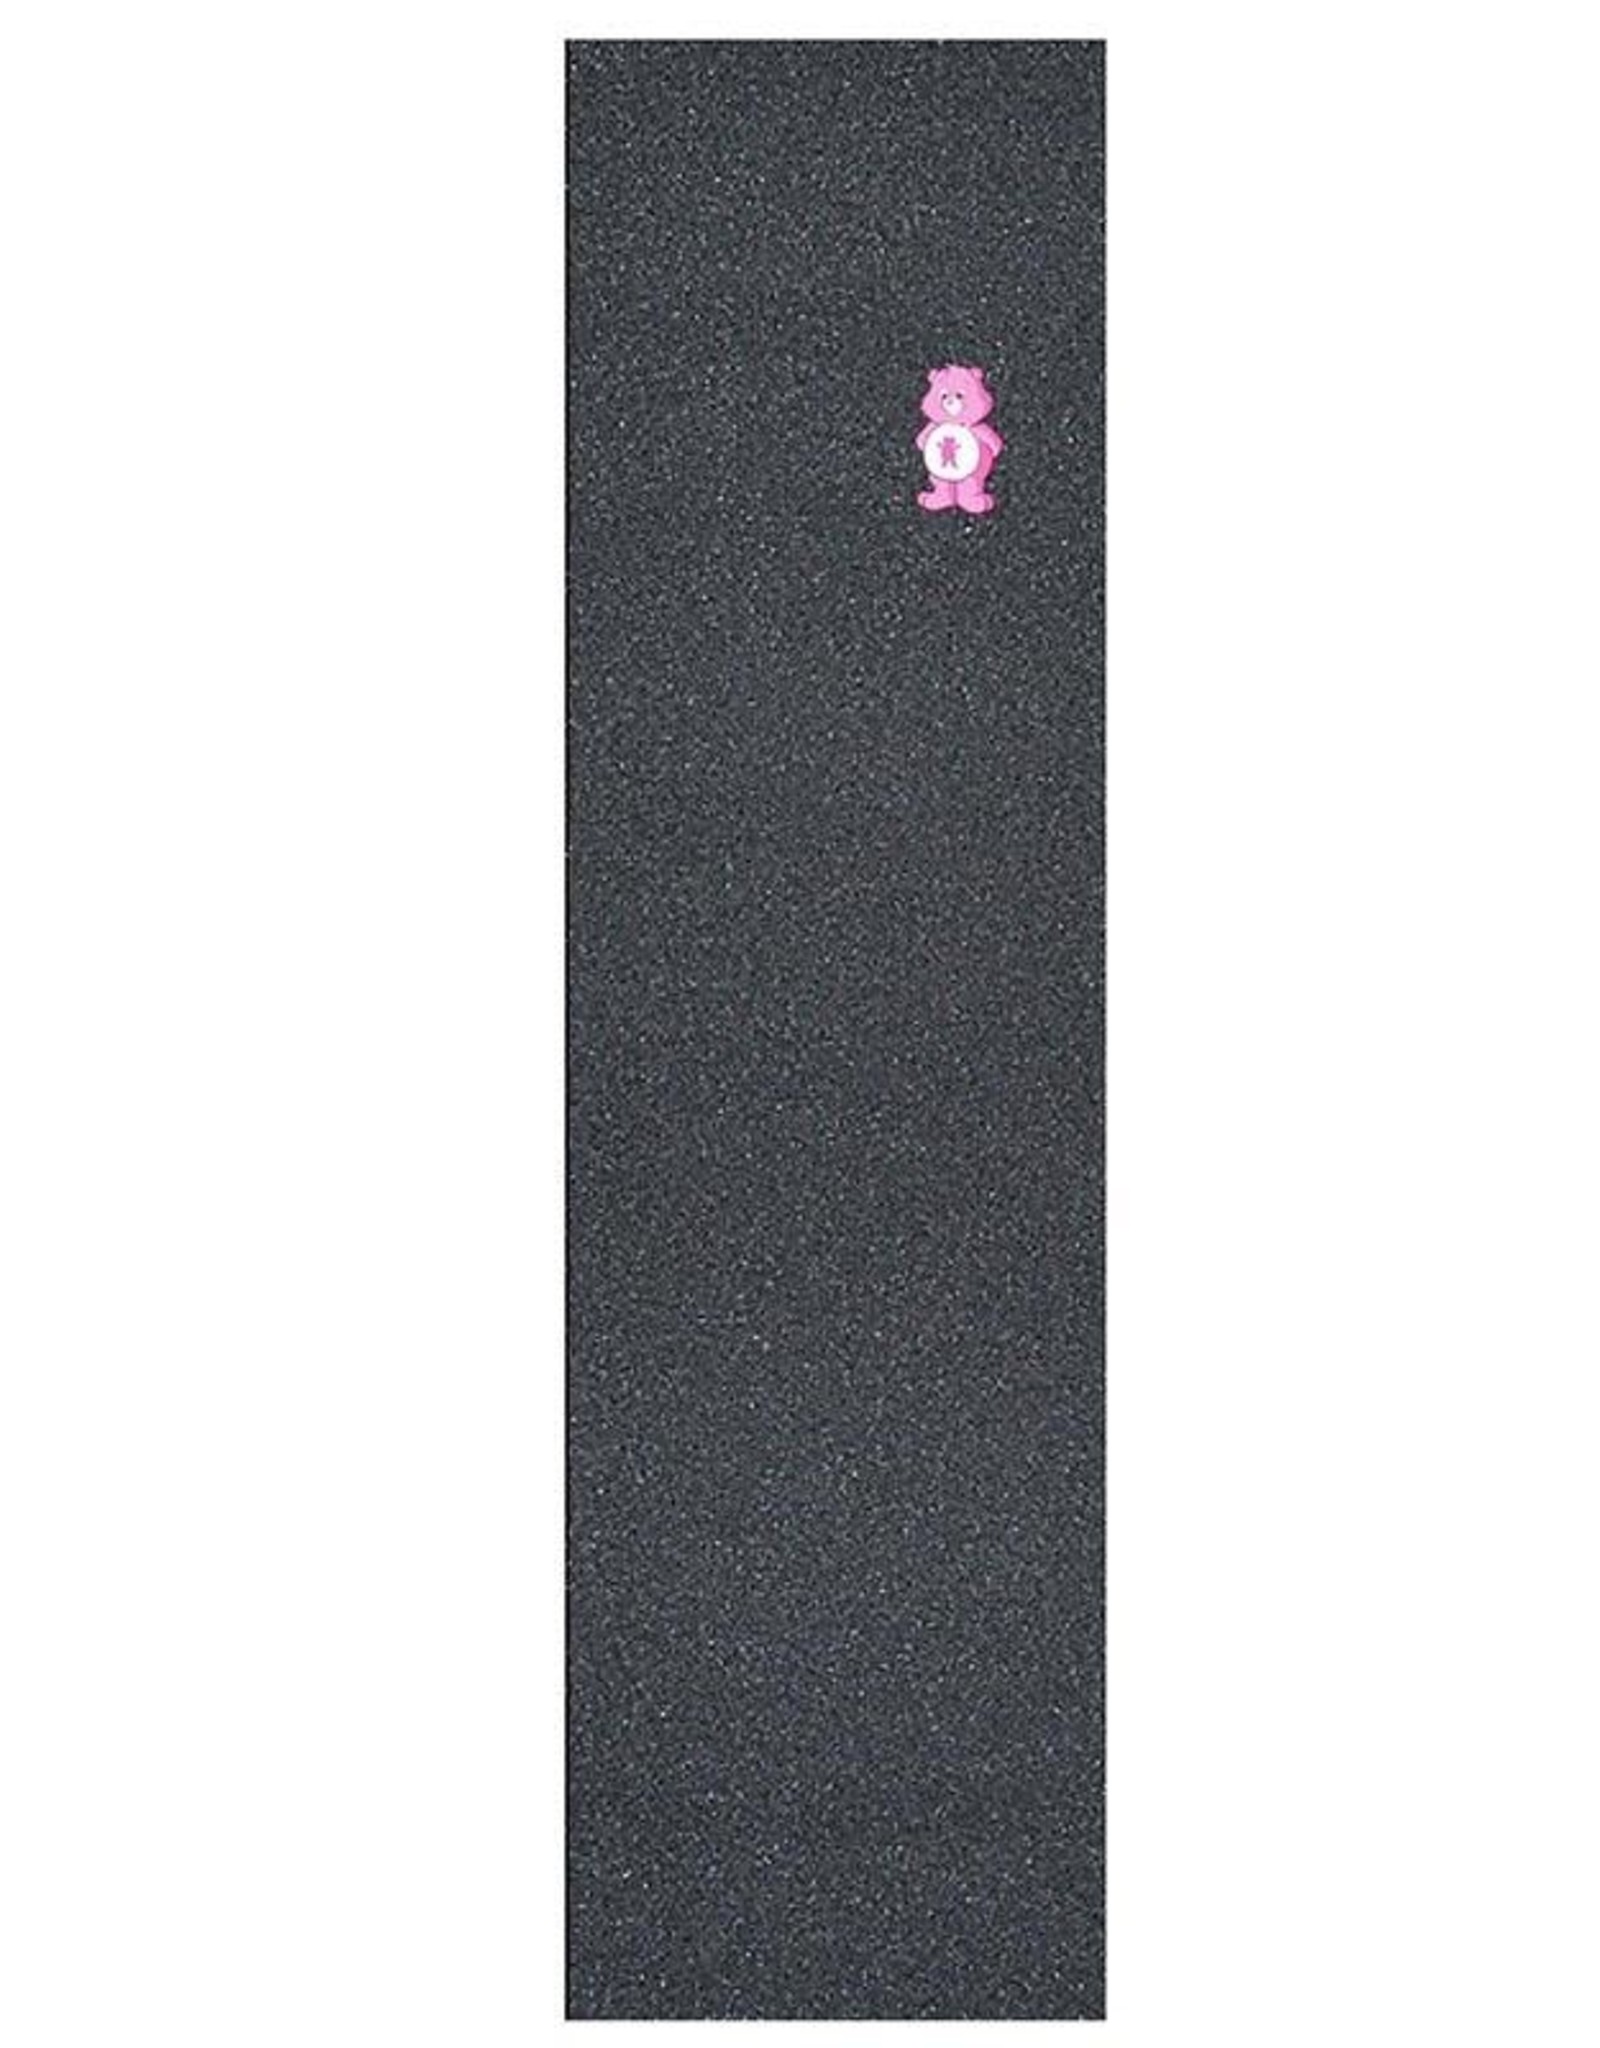 GRIZZLY GRIZZLY GRIP SHEET POSITIVE OG BEAR PINK